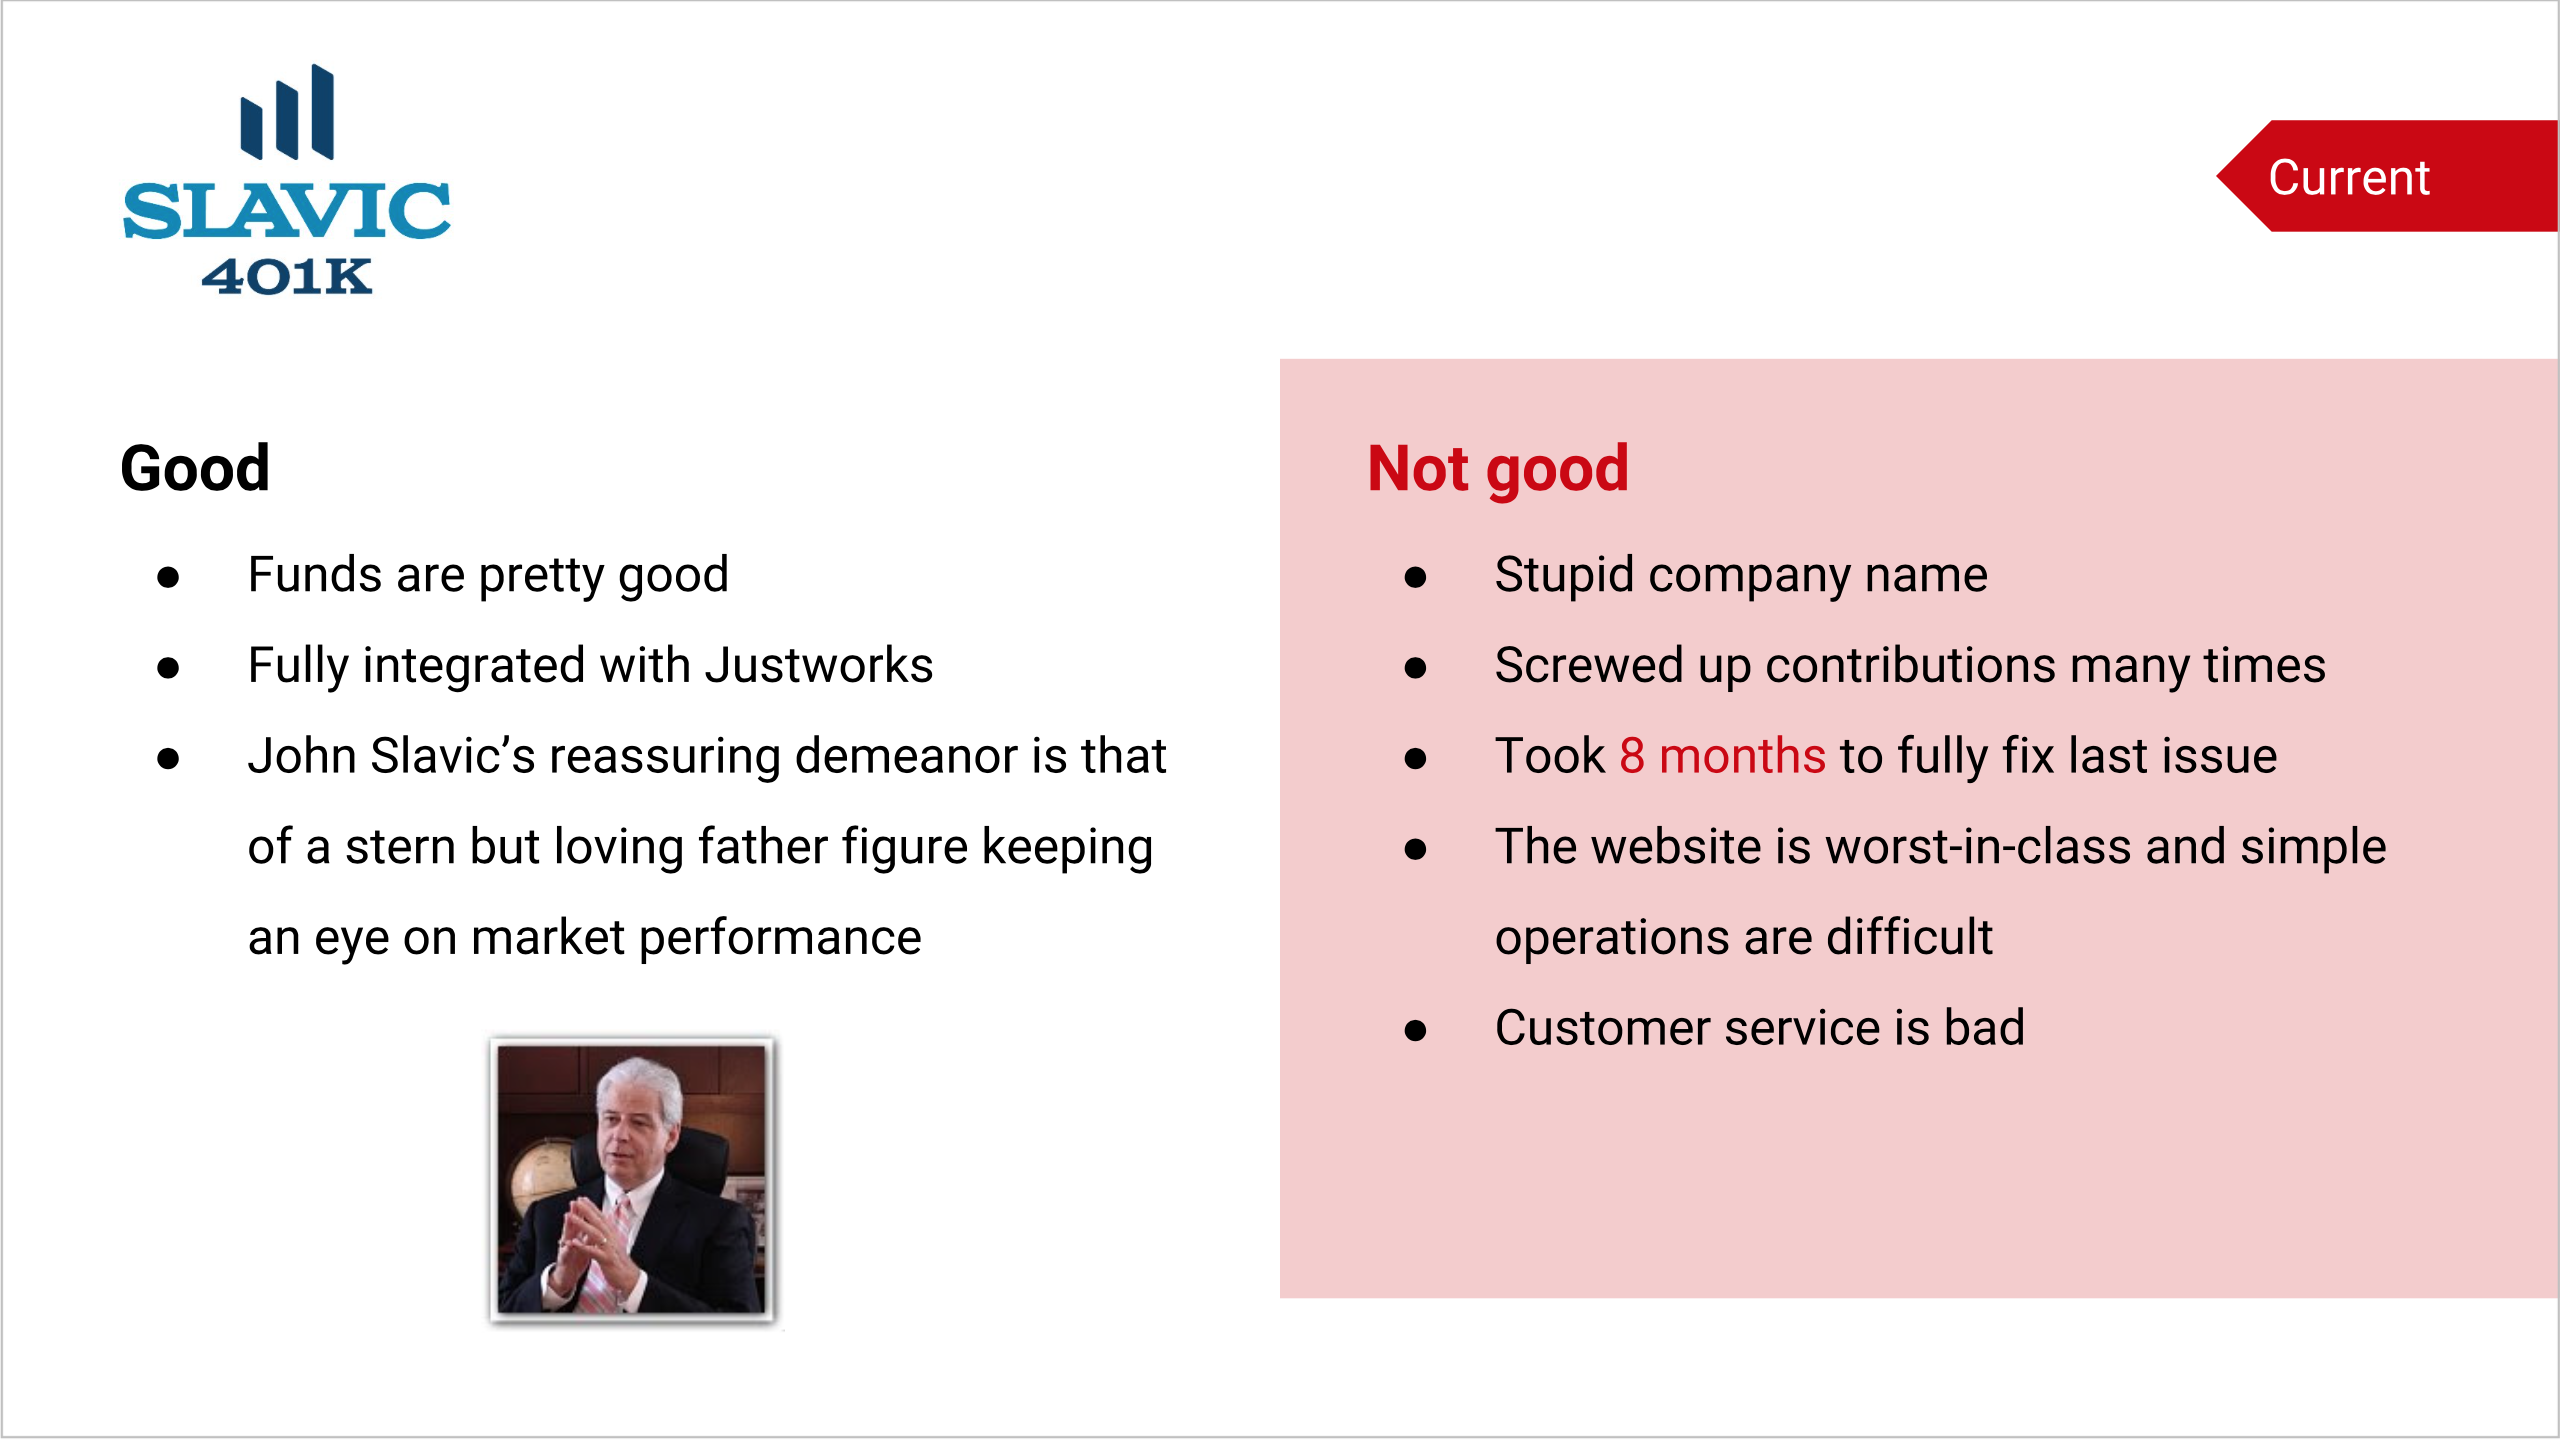 A slide about the pros and cons of our current 401(k) provider, Slavic401k.